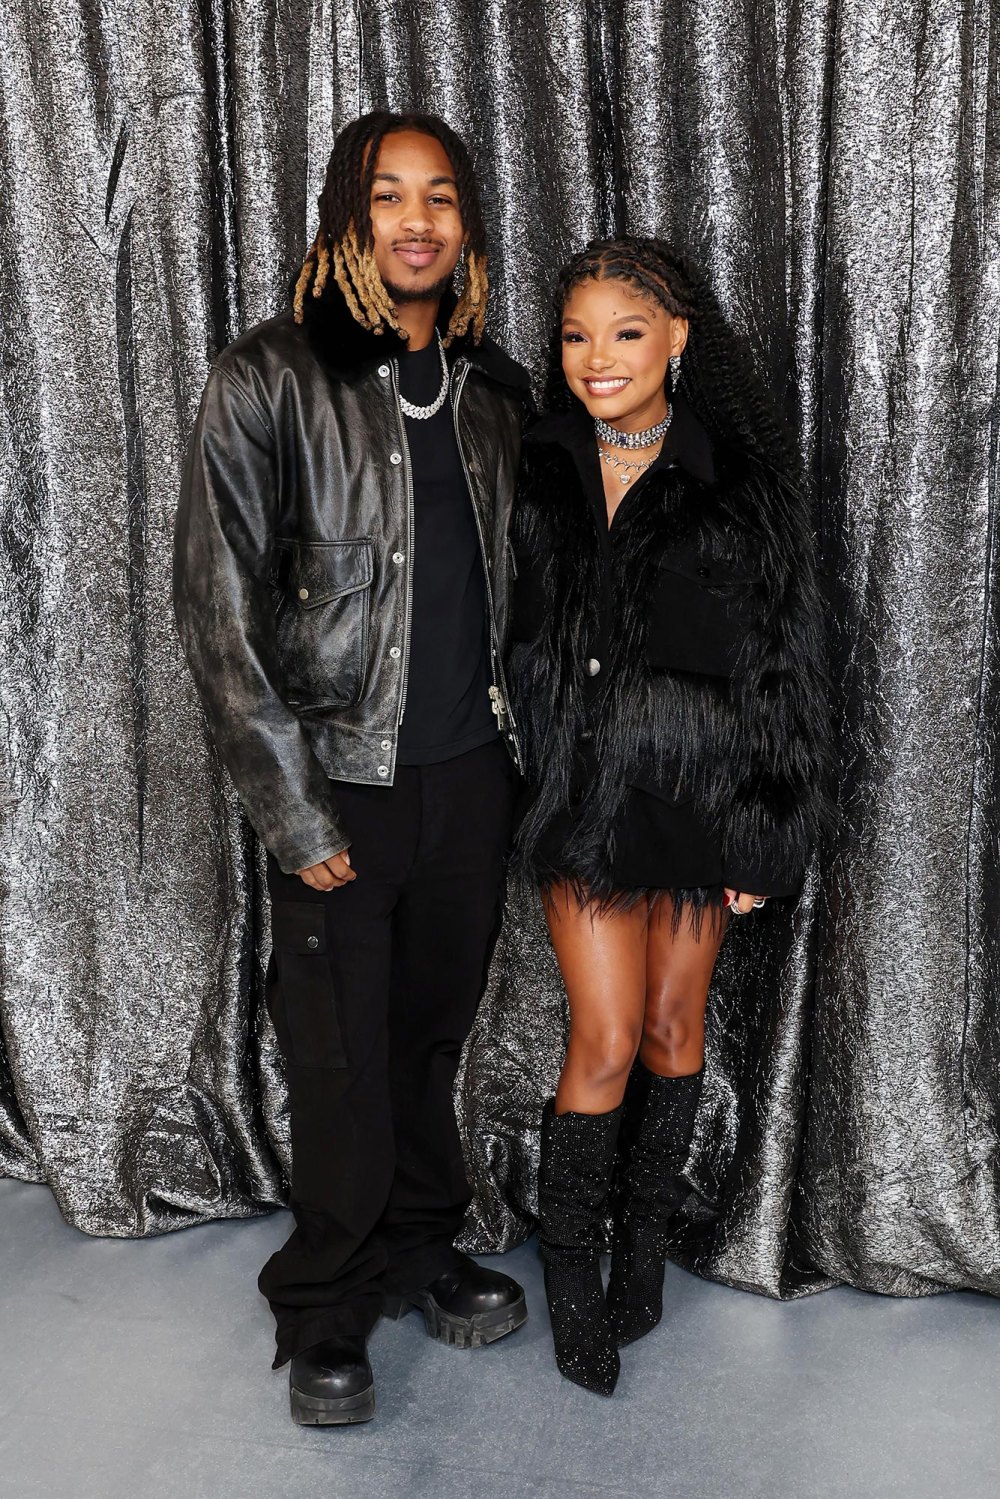 DDG and Halle Bailey's newborn son Halo makes an adorable cameo in Rapper's new music video